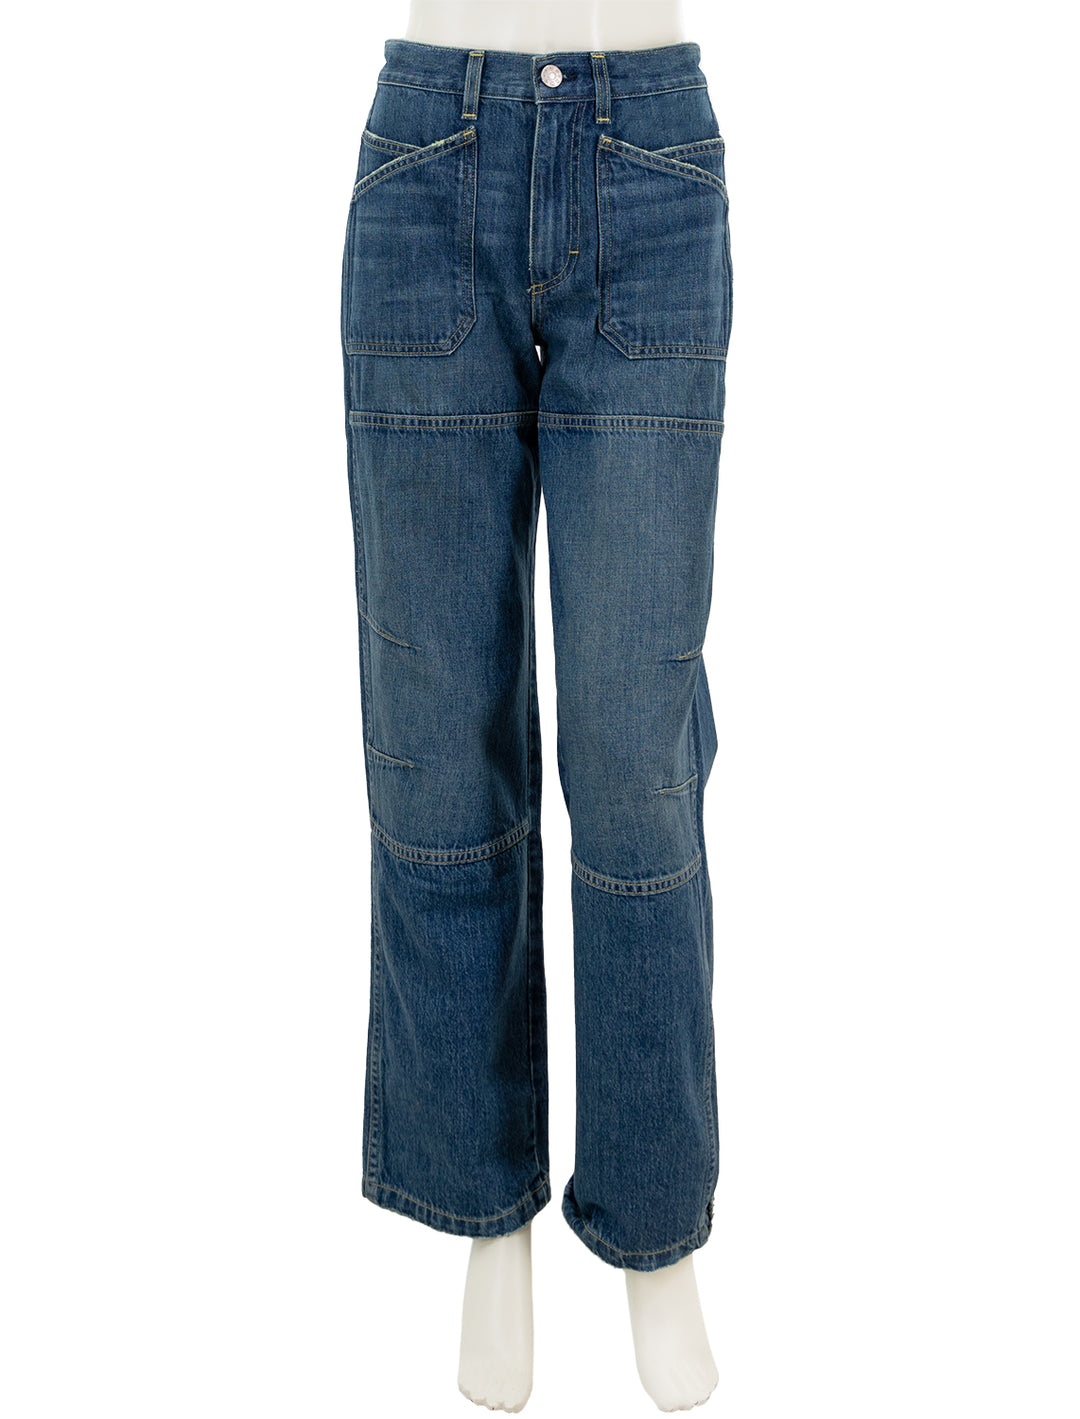 Front view of AMO's Doris Utility Jean in Tease.